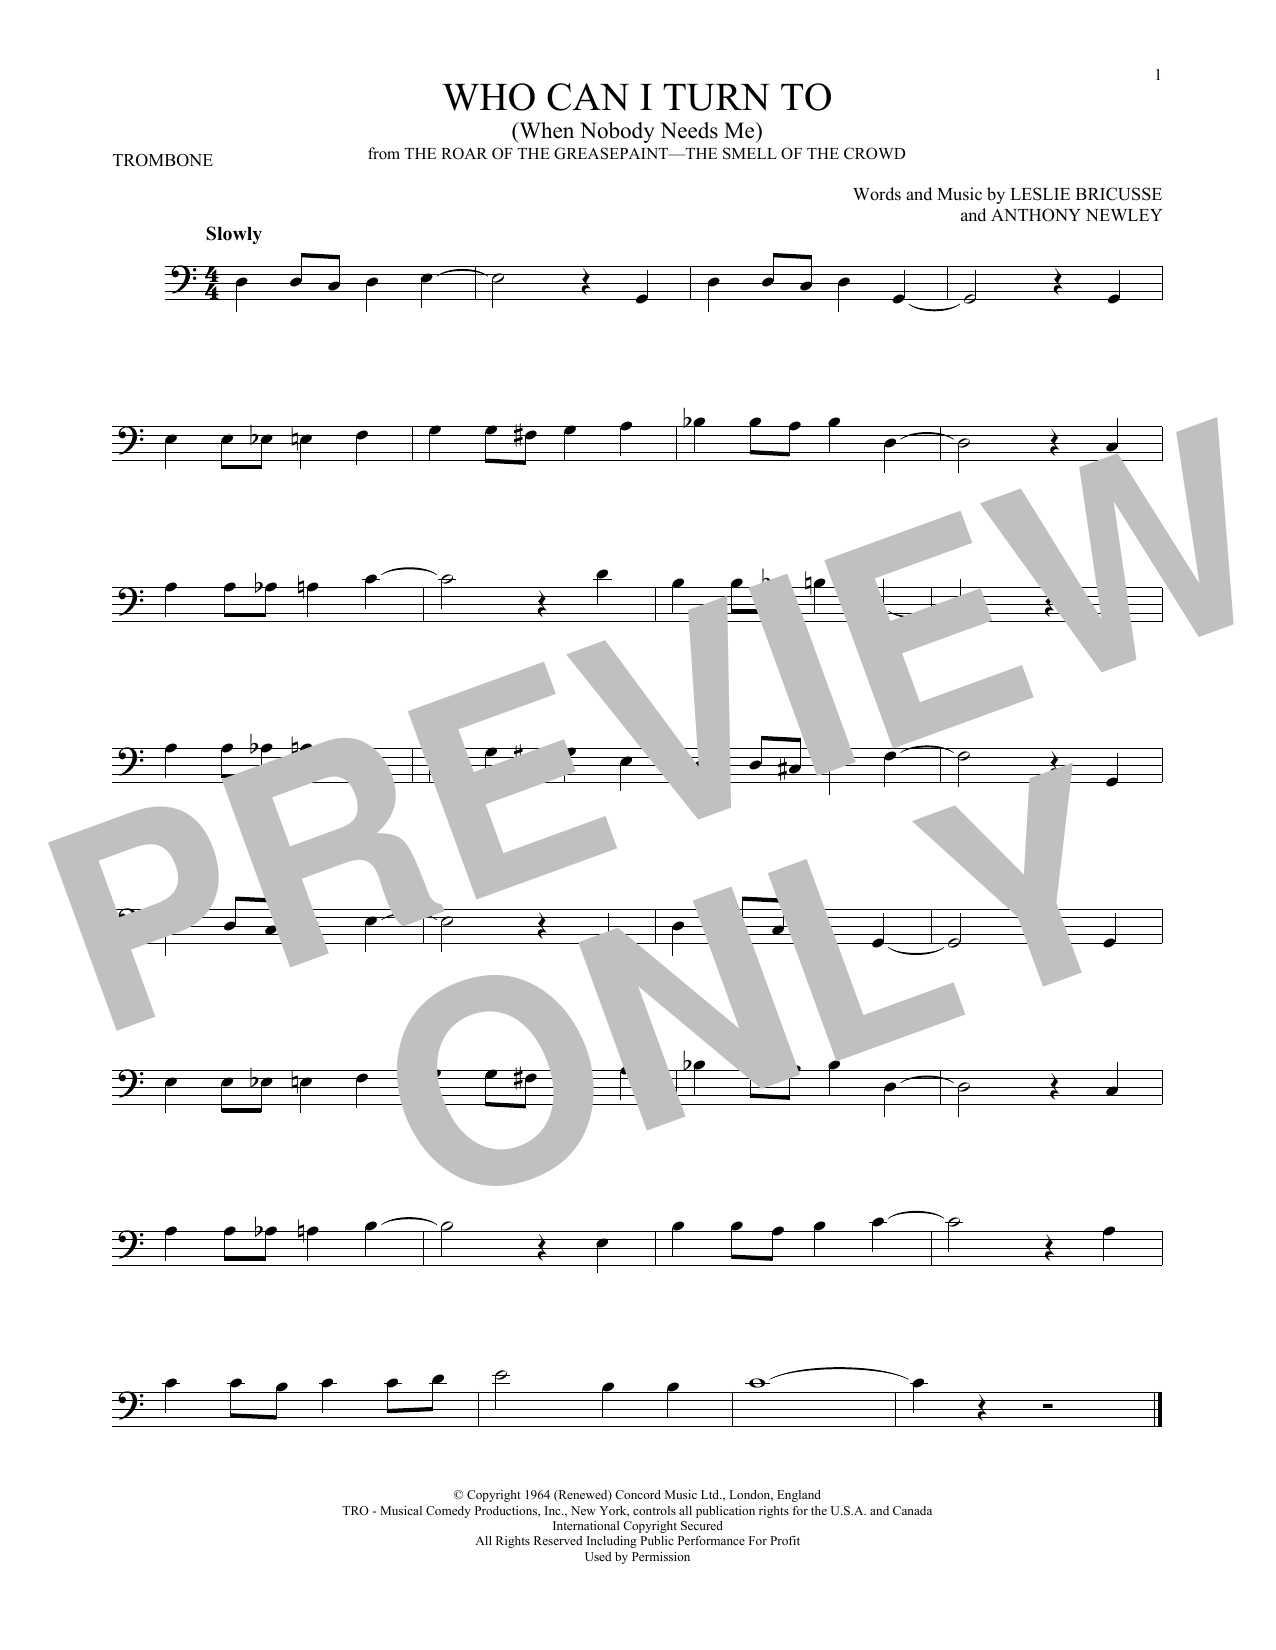 Download Leslie Bricusse Who Can I Turn To (When Nobody Needs Me Sheet Music